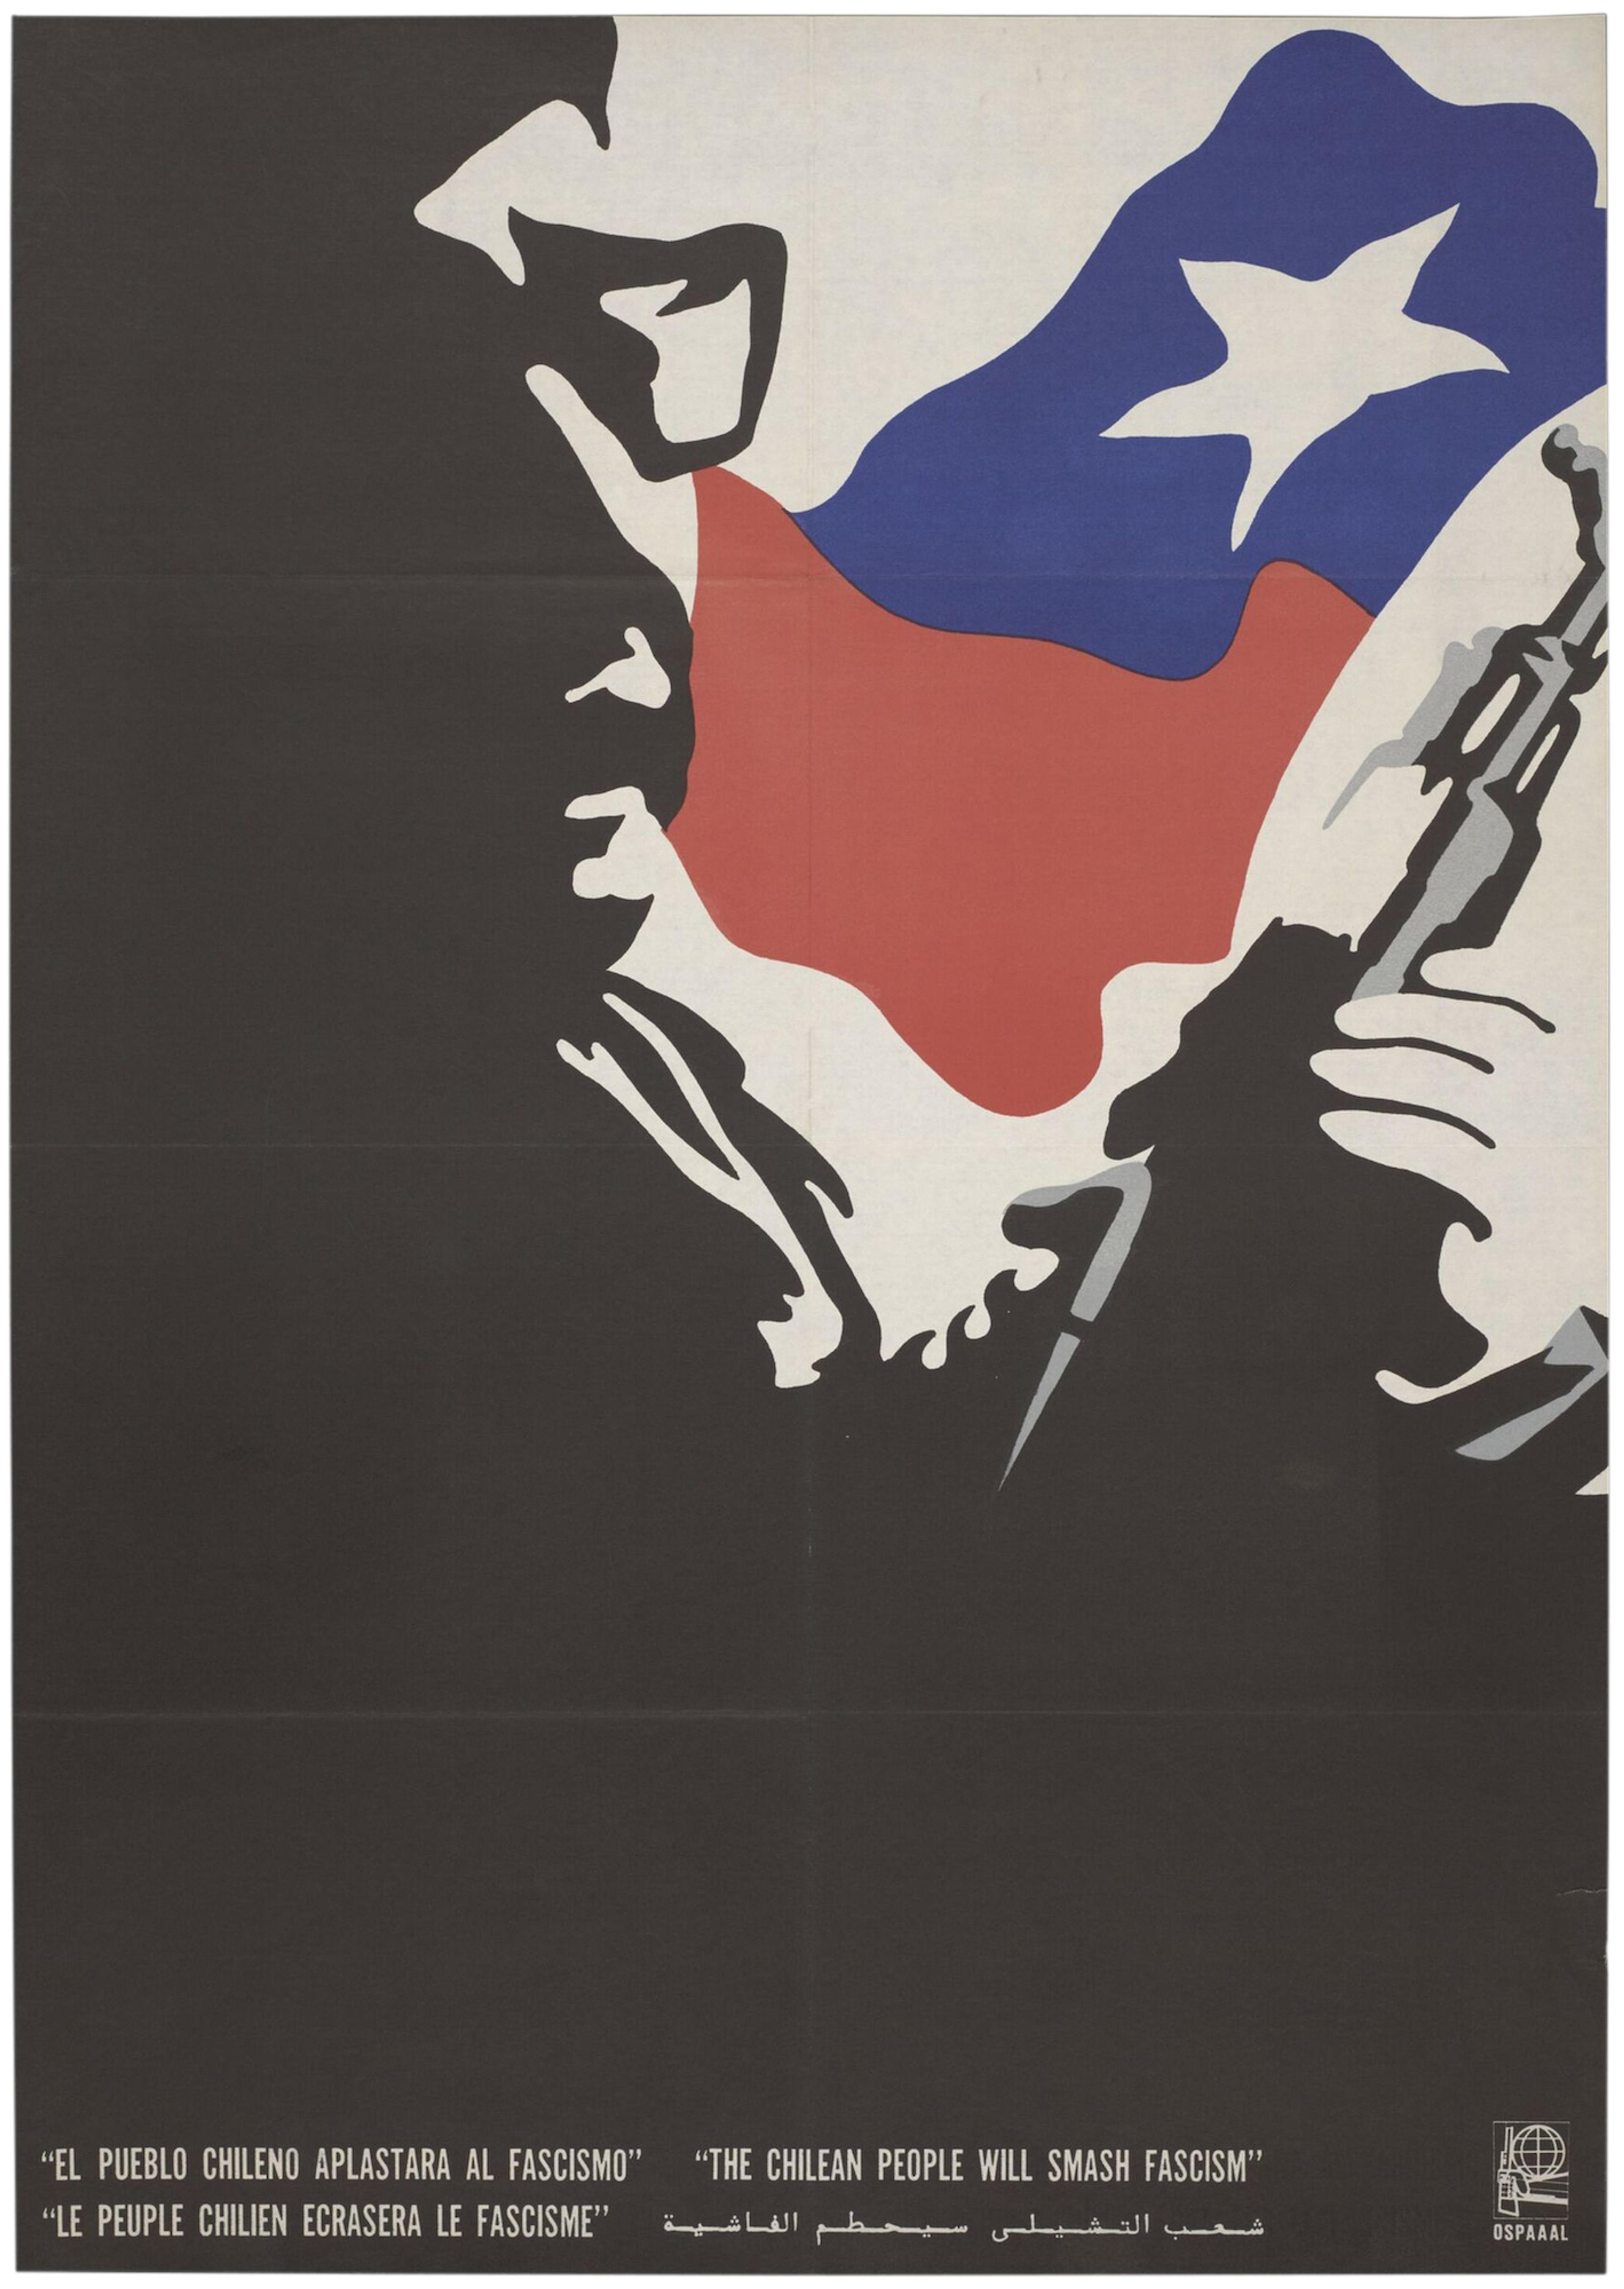 Offset lithograph poster depicting the silhouette of a man wearing glasses and holding a gun. Behind him is a Chilean flag. Lettered across the bottom in white, 'The Chilean People Will Smash Fascism' in Spanish, English, French and Arabic.